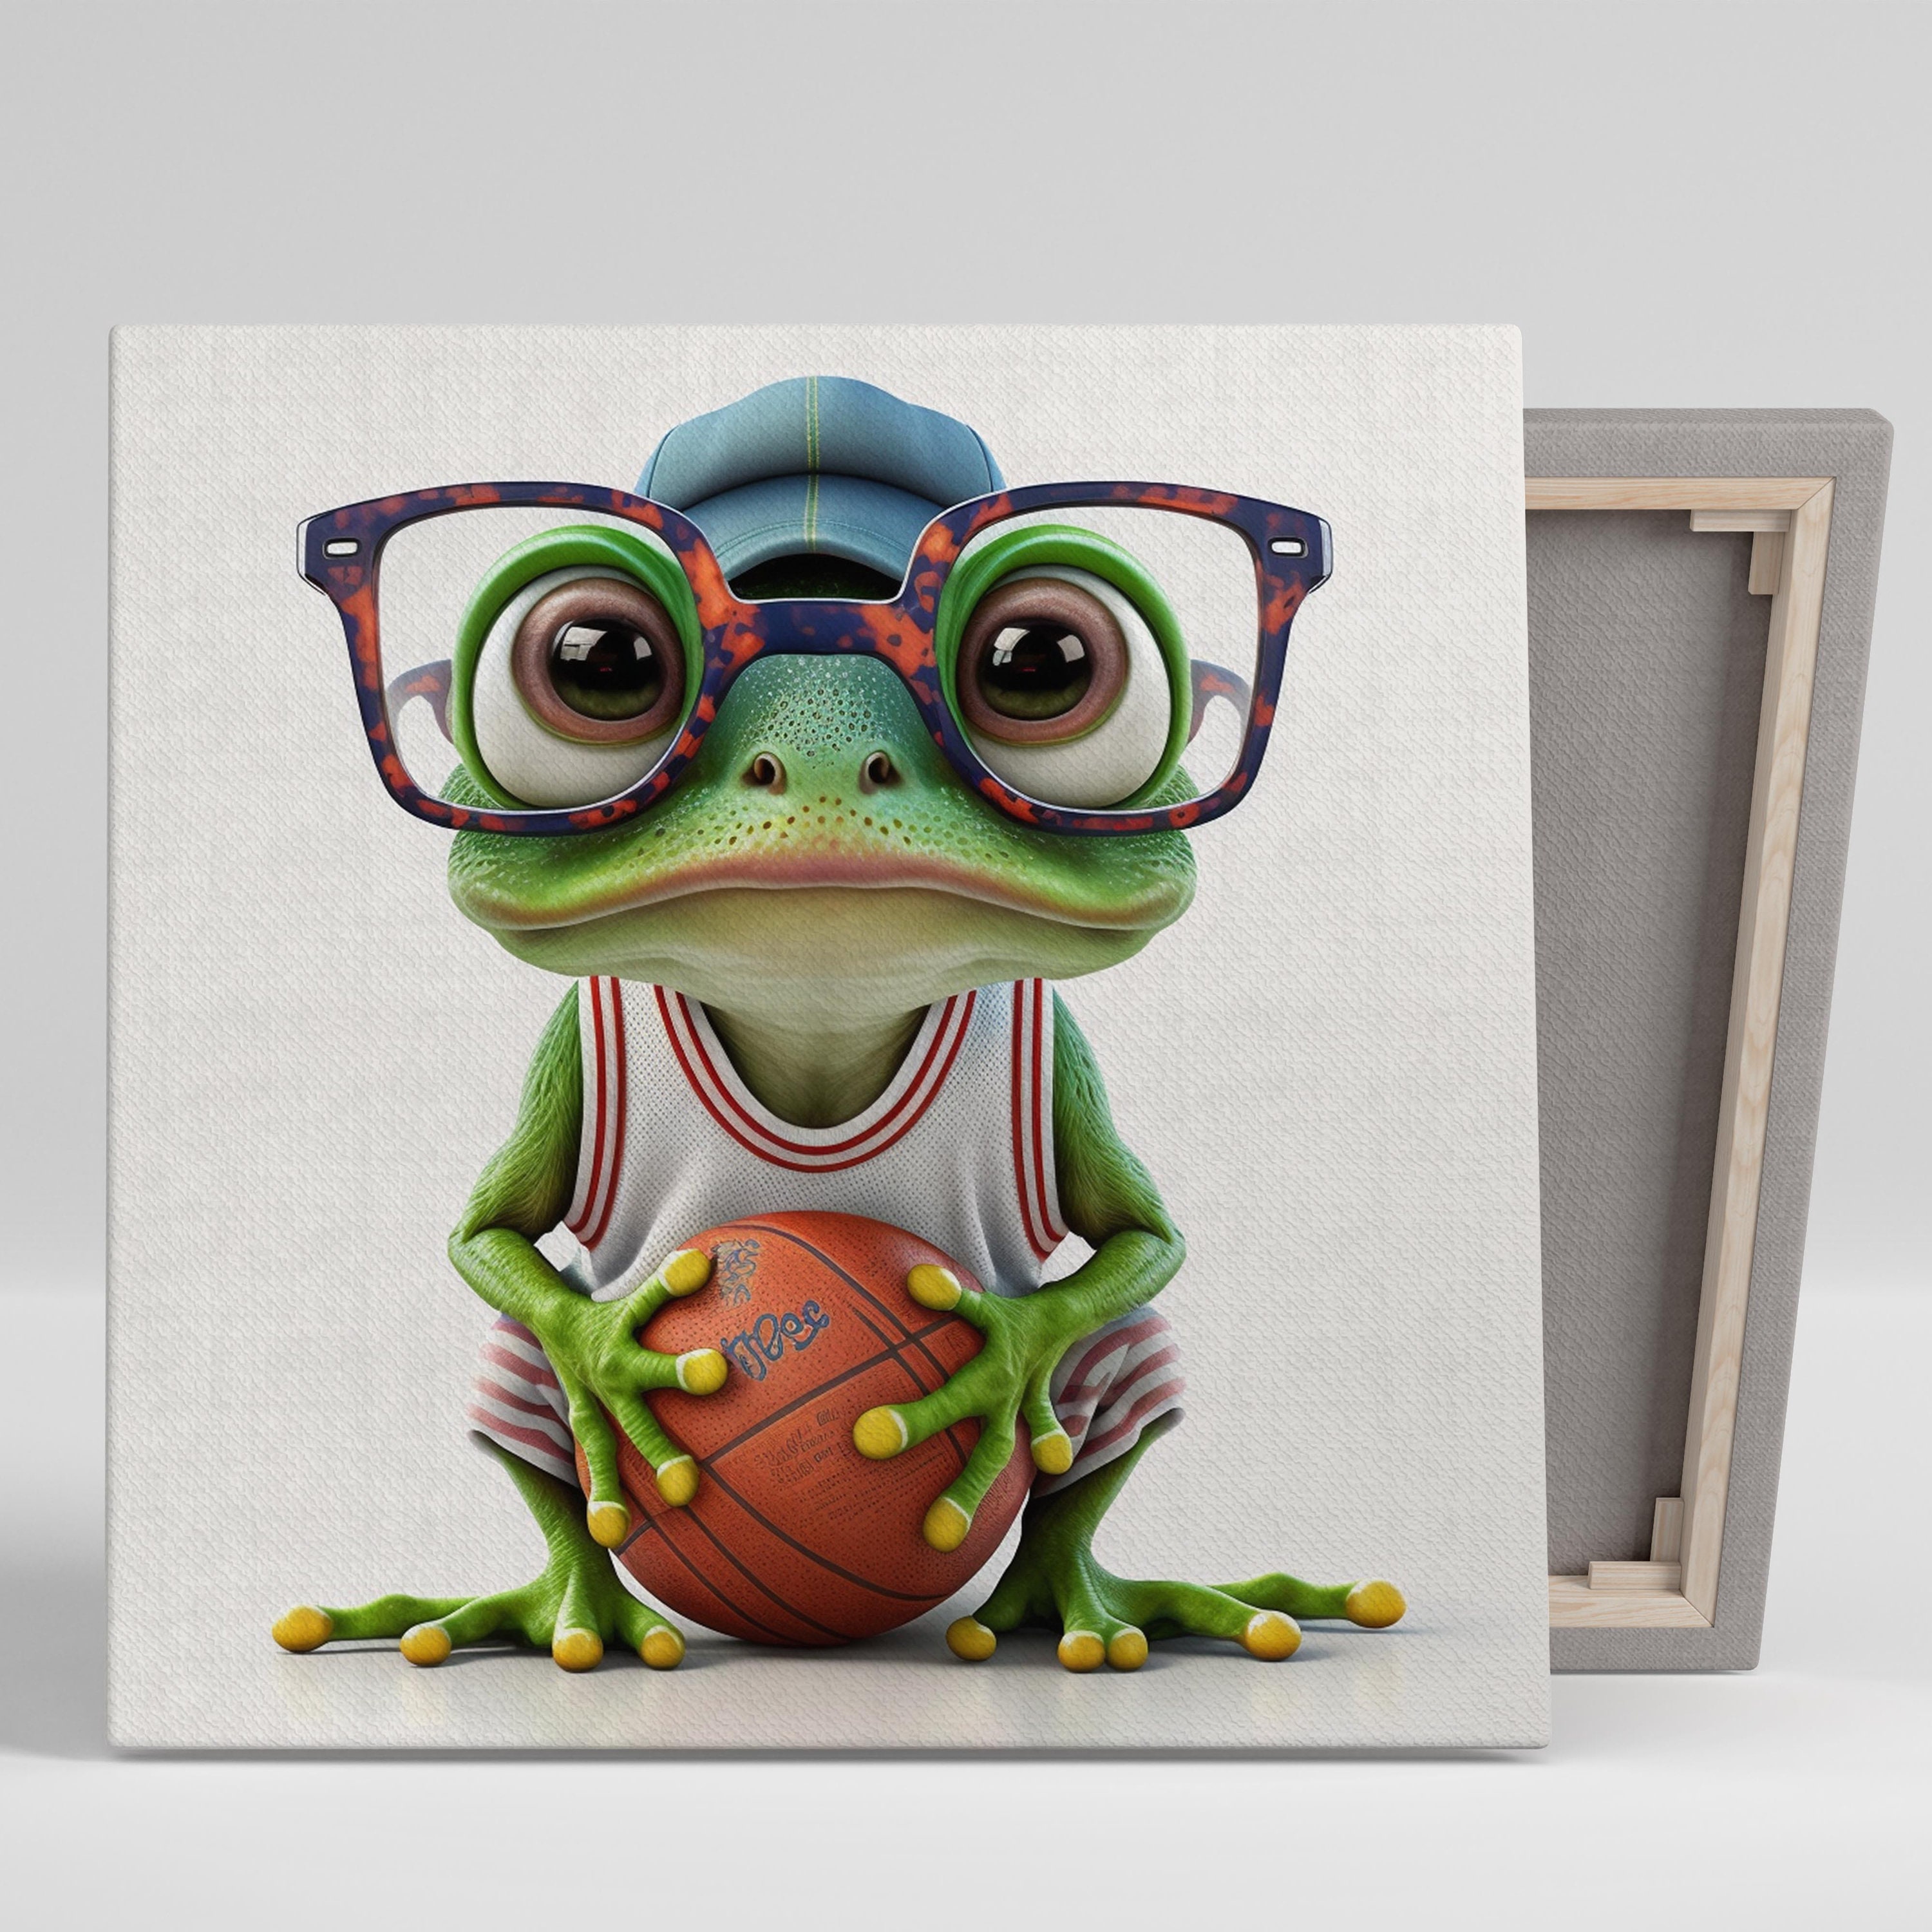 Frog with mustache and fish glasses by Artinspired